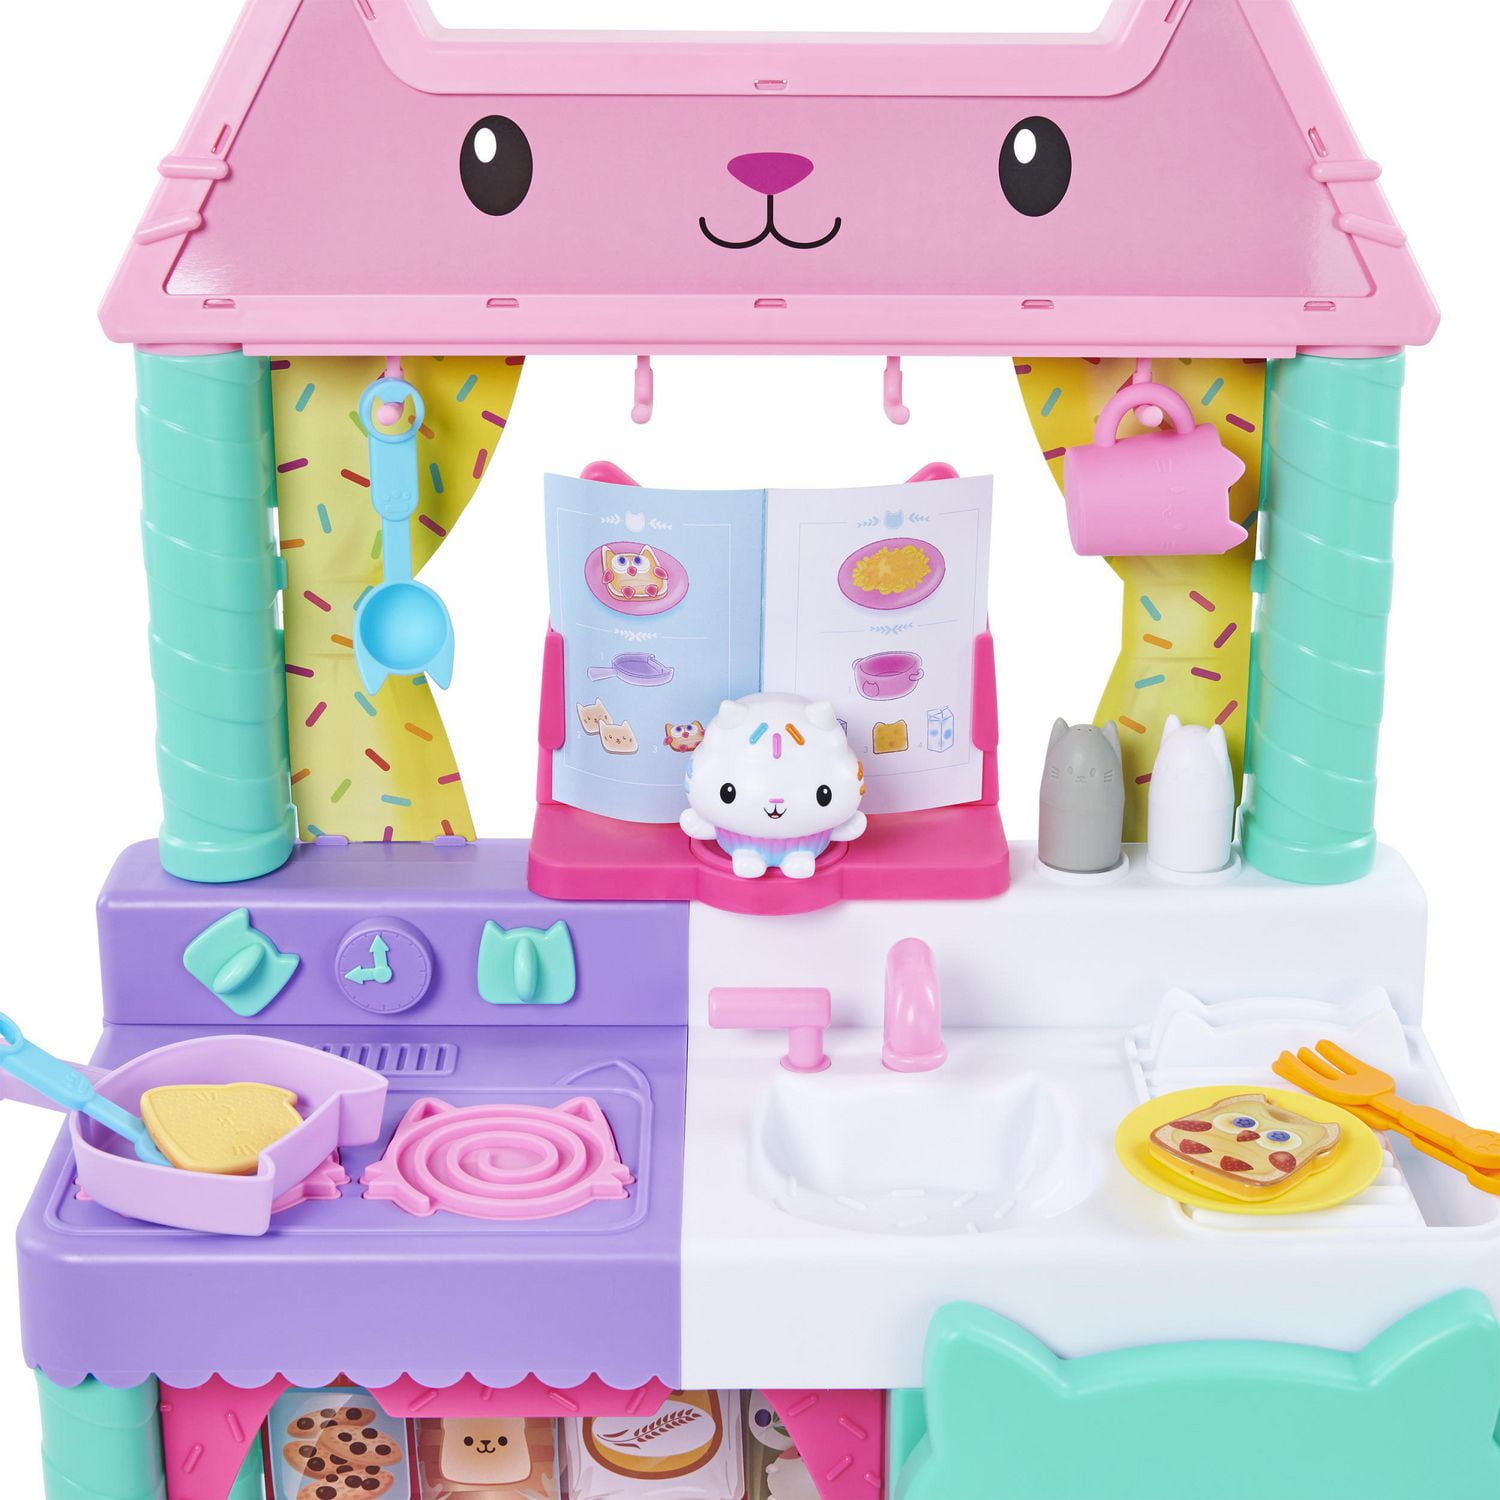 Barbie Dreamhouse Adventures Doll & Accessories, Travel Set with Daisy  Doll, Kitten, Working Suitcase & 9 Pieces ( Exclusive) : Toys & Games  